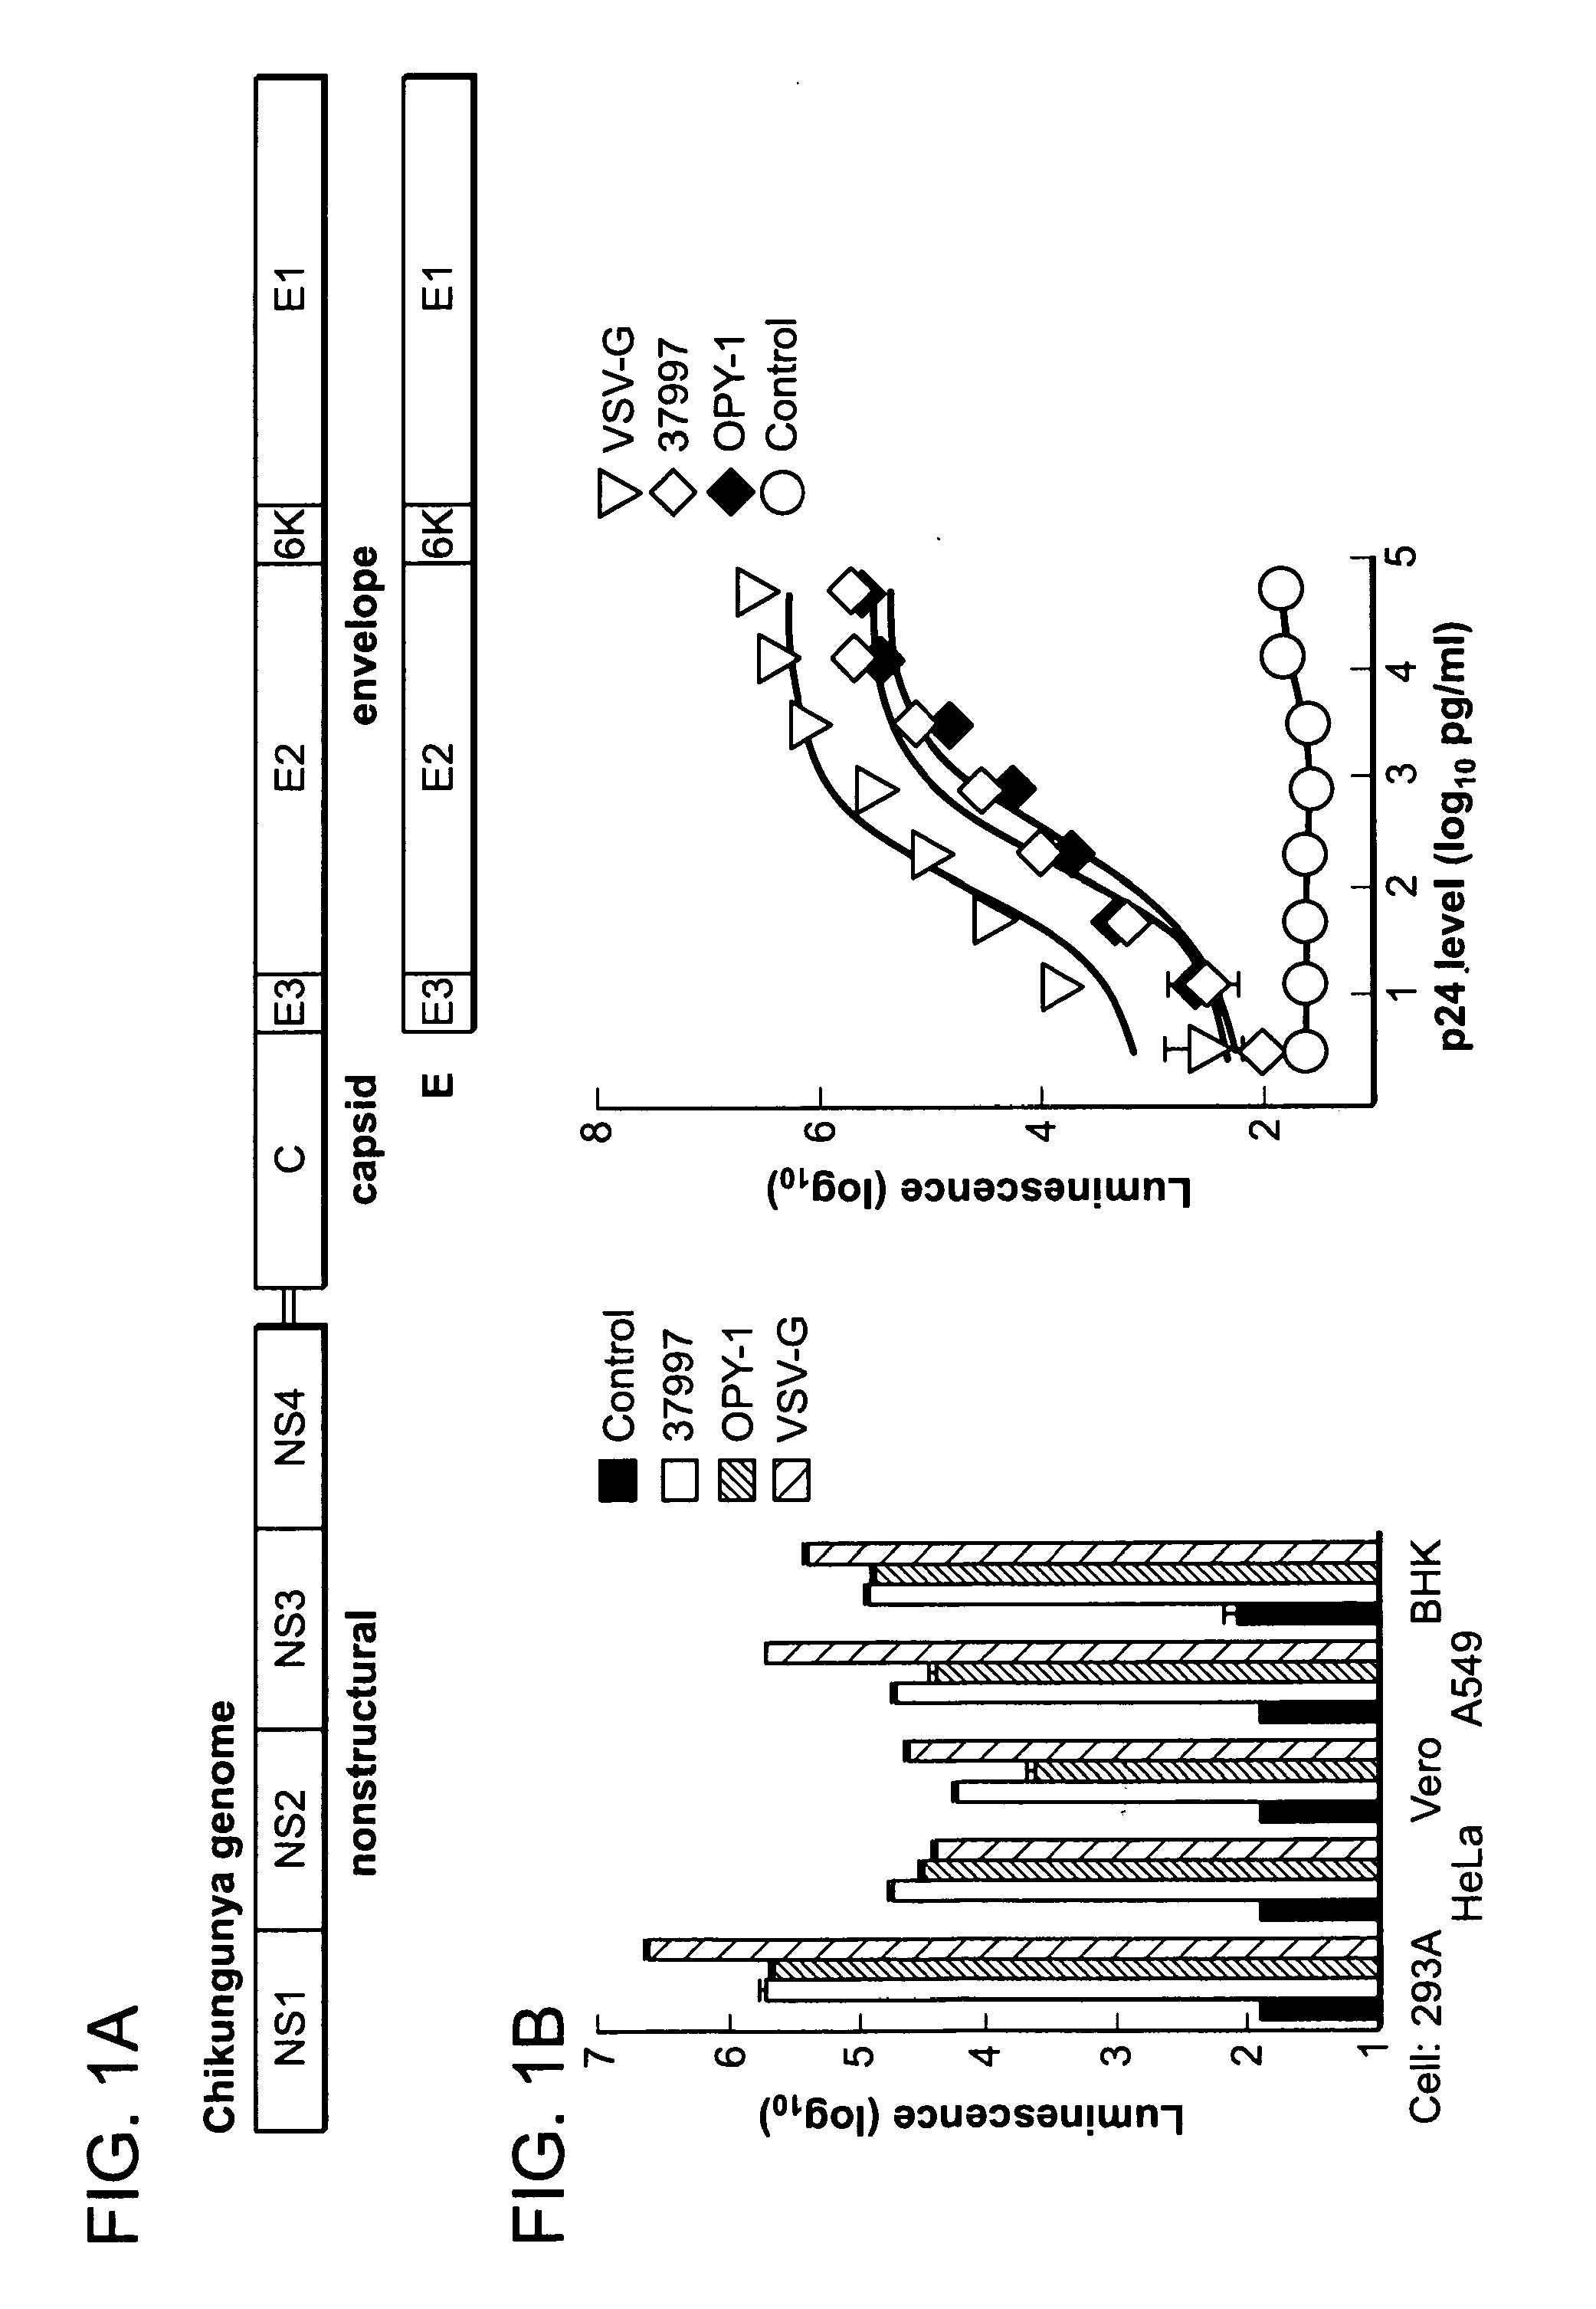 Virus like particle compositions and methods of use